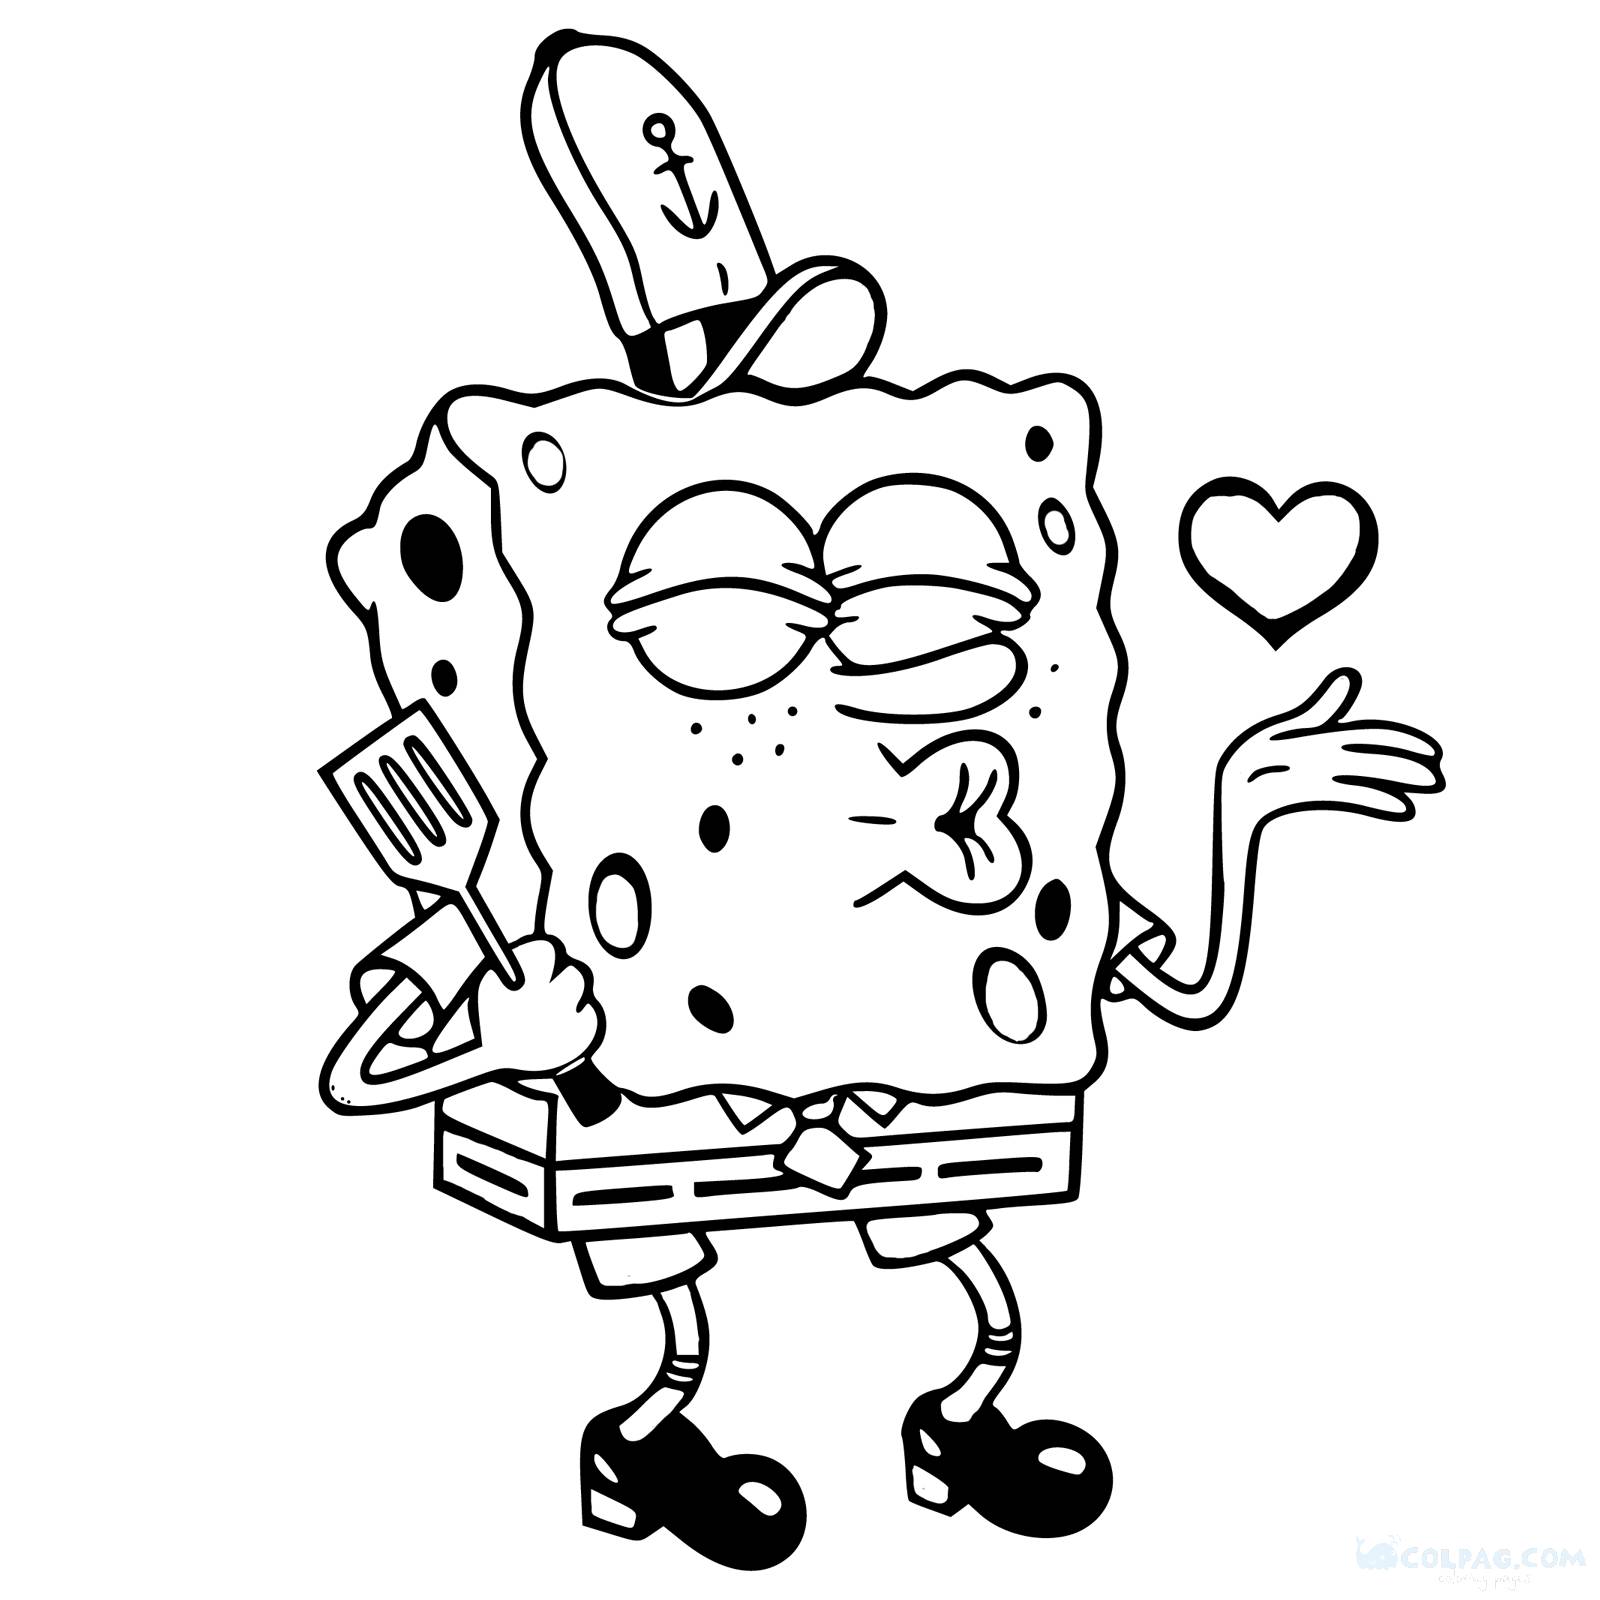 Sponge Bob Coloring Pages to Print